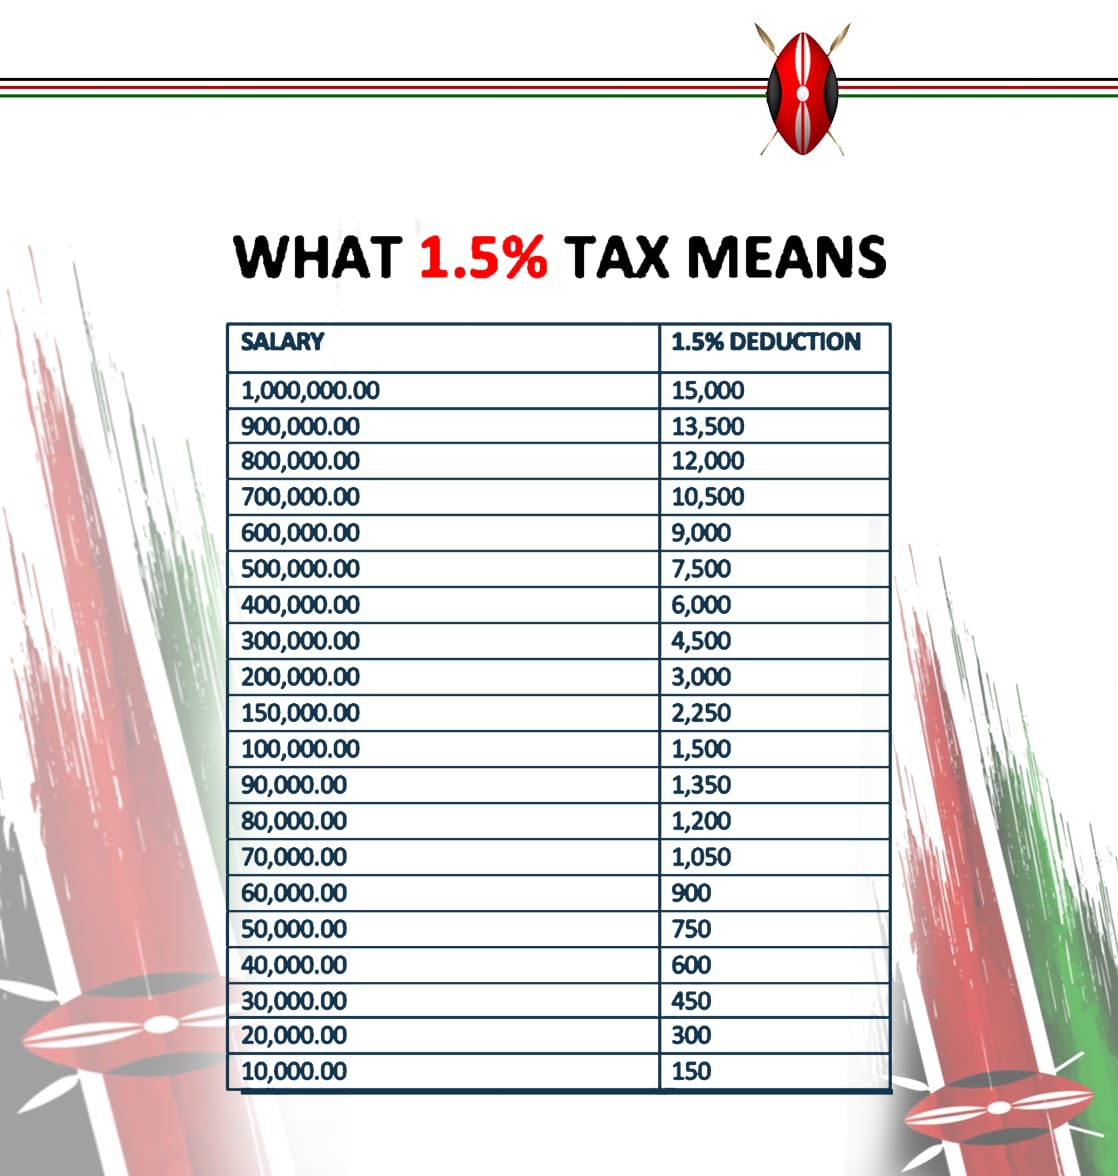 This housing tax is the most friendly tax and affordable to all hustlers.

Indeed the government is very inclusive and considerate in decision making on matters of development.
#FinanceBillDebate 
#FinanceBill2023